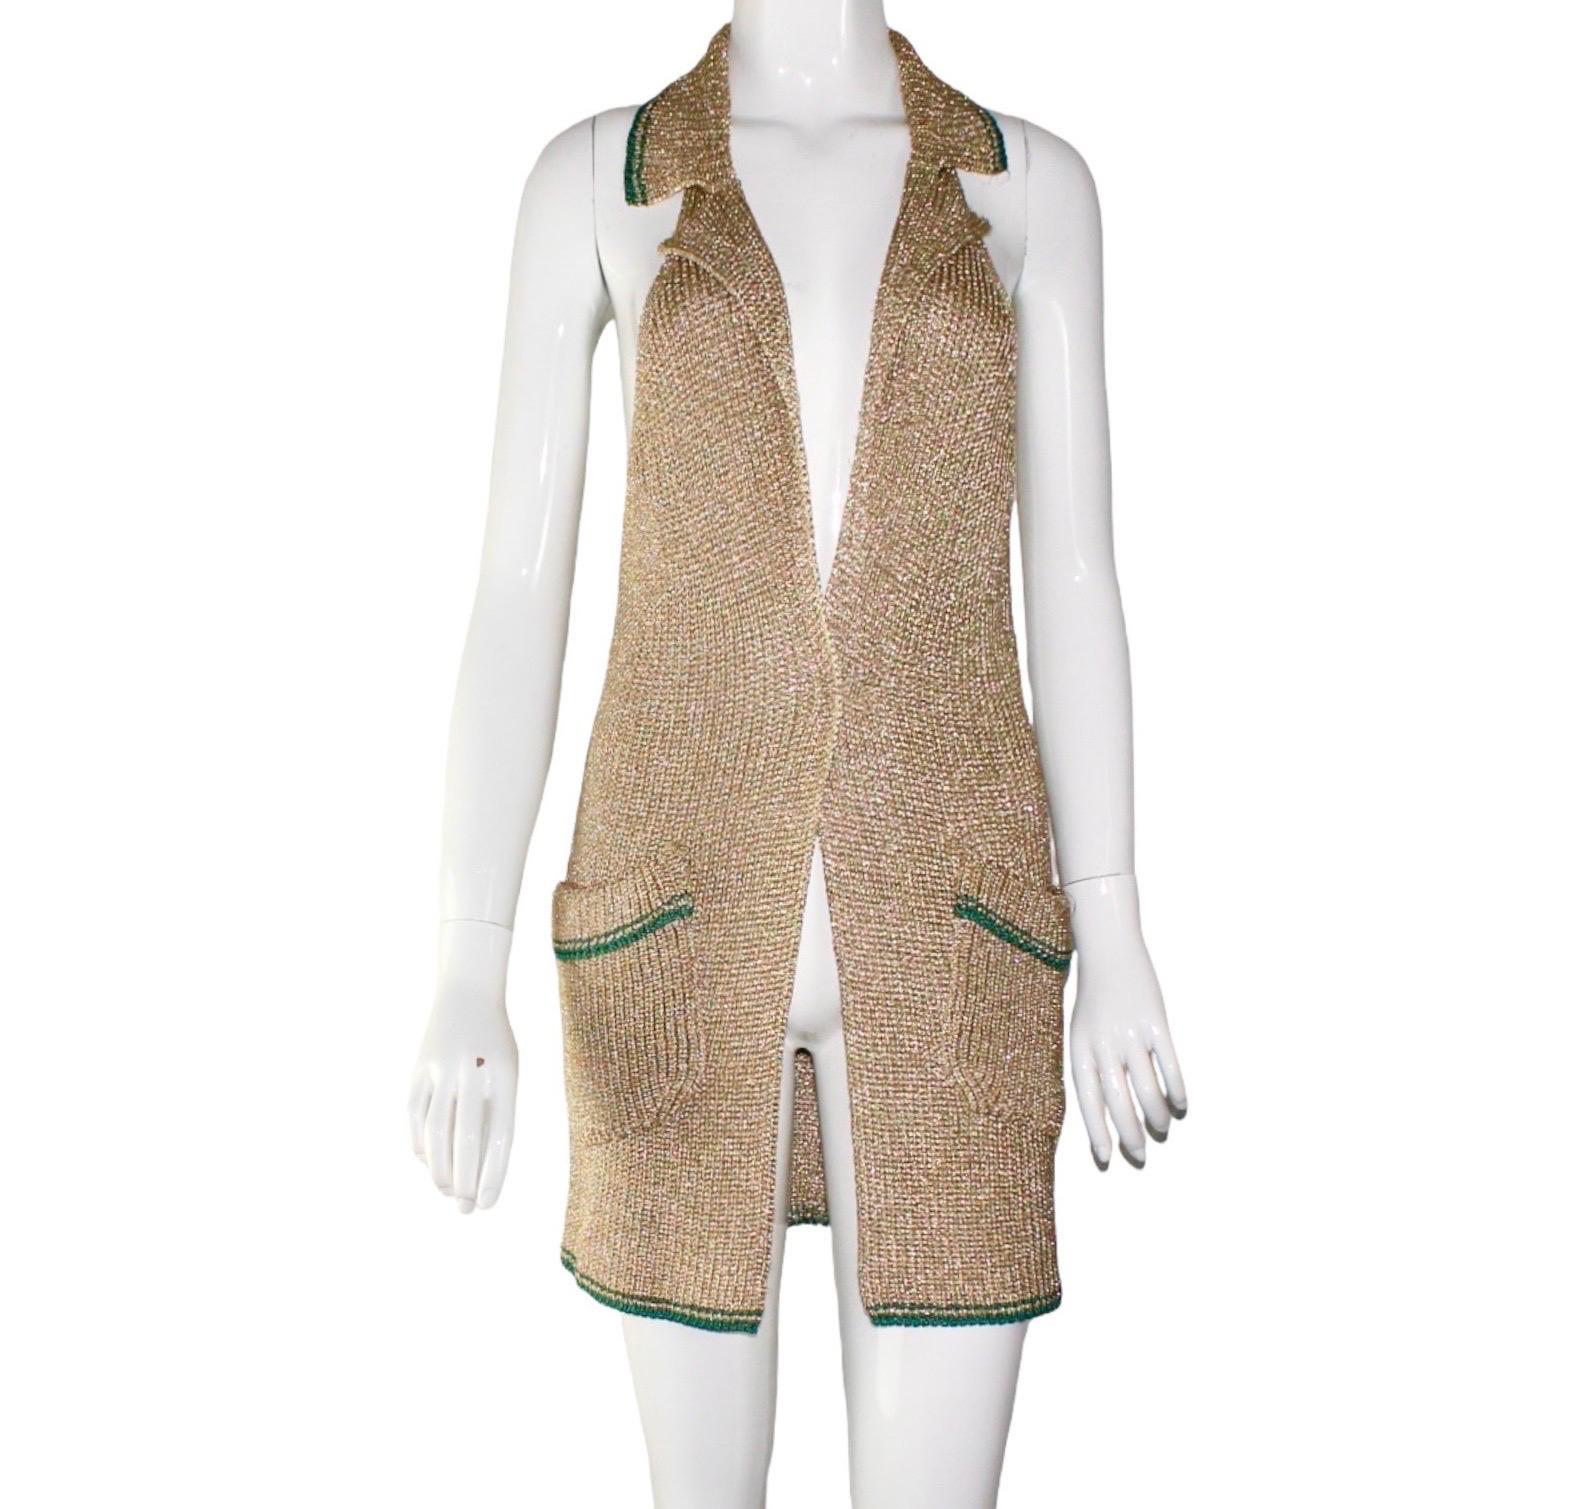 A stunning knit jacket by MISSONI - impossible to find!
Such a versatile piece - wear it with your favorite pair of jeans, dress, skirt, bodysuit… or as a dress
Lapel collar
Gold-metallic color with contrast trimmings
Two front pockets, still